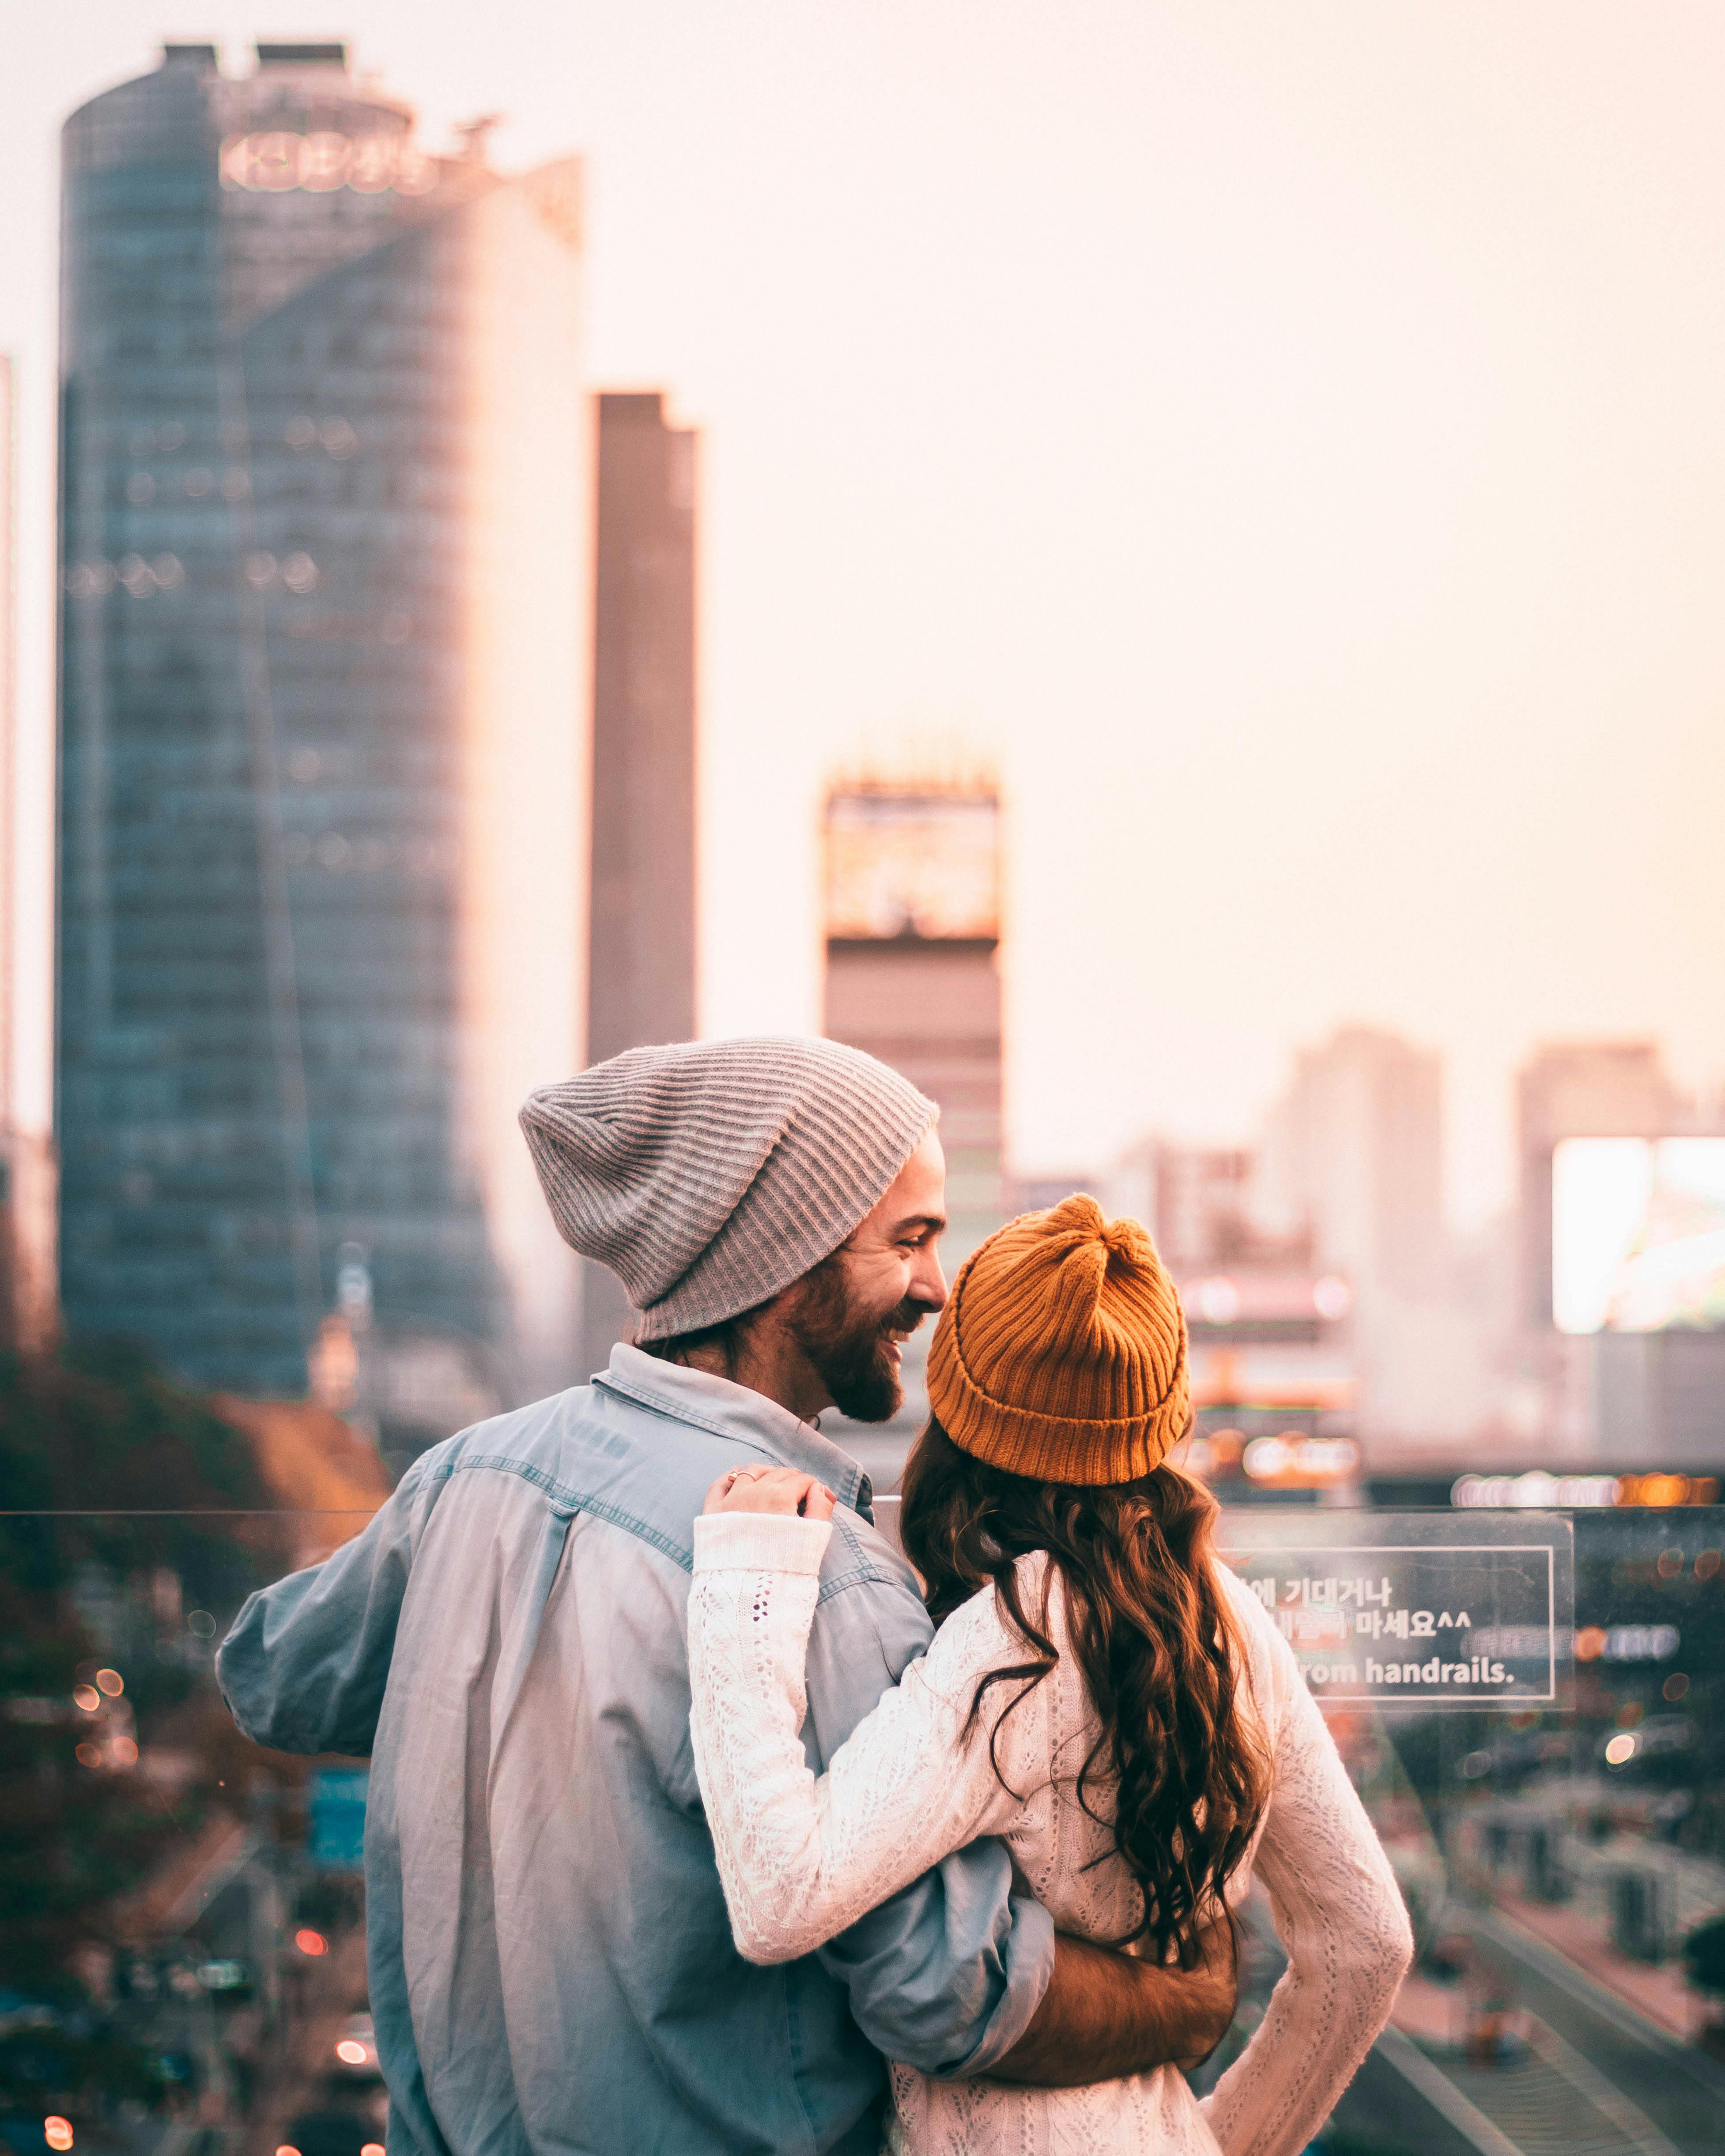 500+ Couple Goals Pictures | Download Free Images on Unsplash